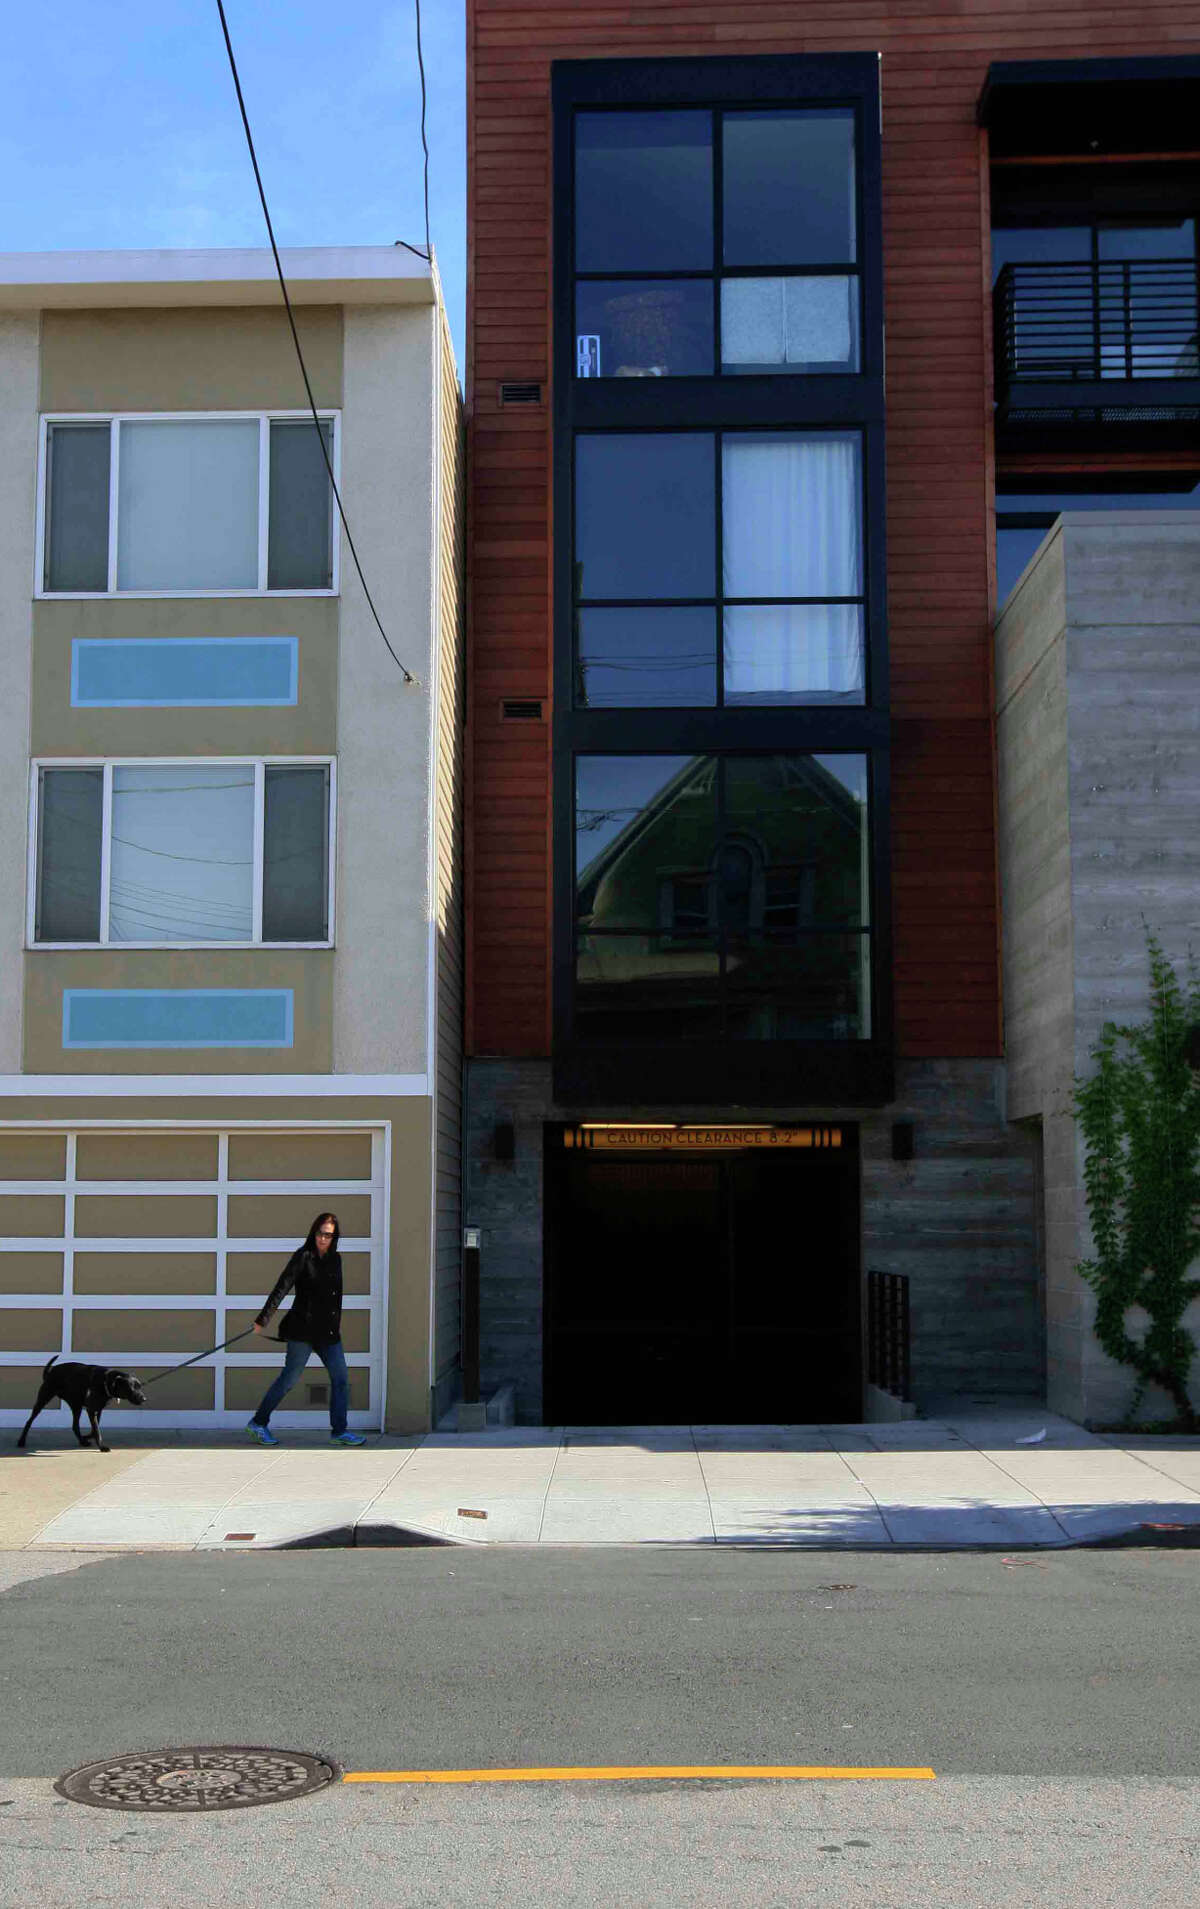 A woman and her dog walk past the residential building alongside the new mixed-use structure at 1266 9th Ave. in San Francisco’s Inner Sunset. In the center is the entrance to the 19-unit apartment building’s underground garage, which begins 9 feet in from the sidewalk.